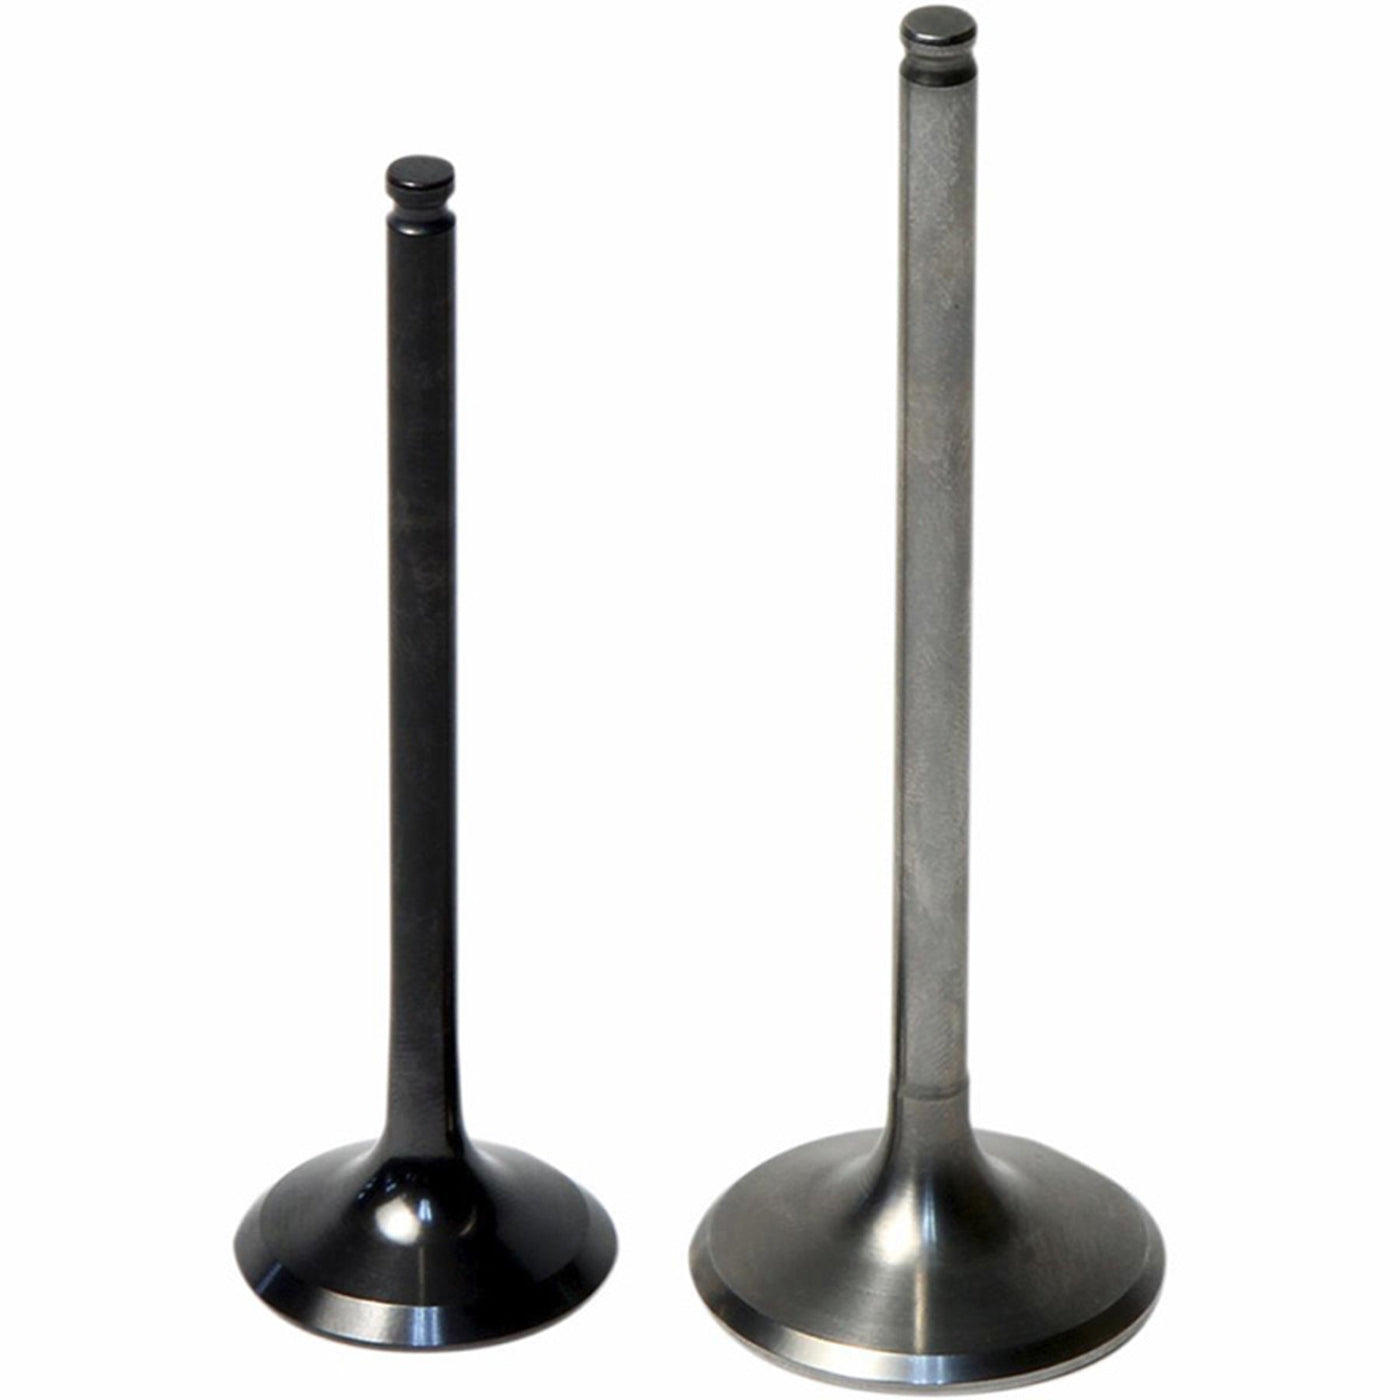 Hotcams 8400009-2 Intake and Exhaust Valves #8400009-2